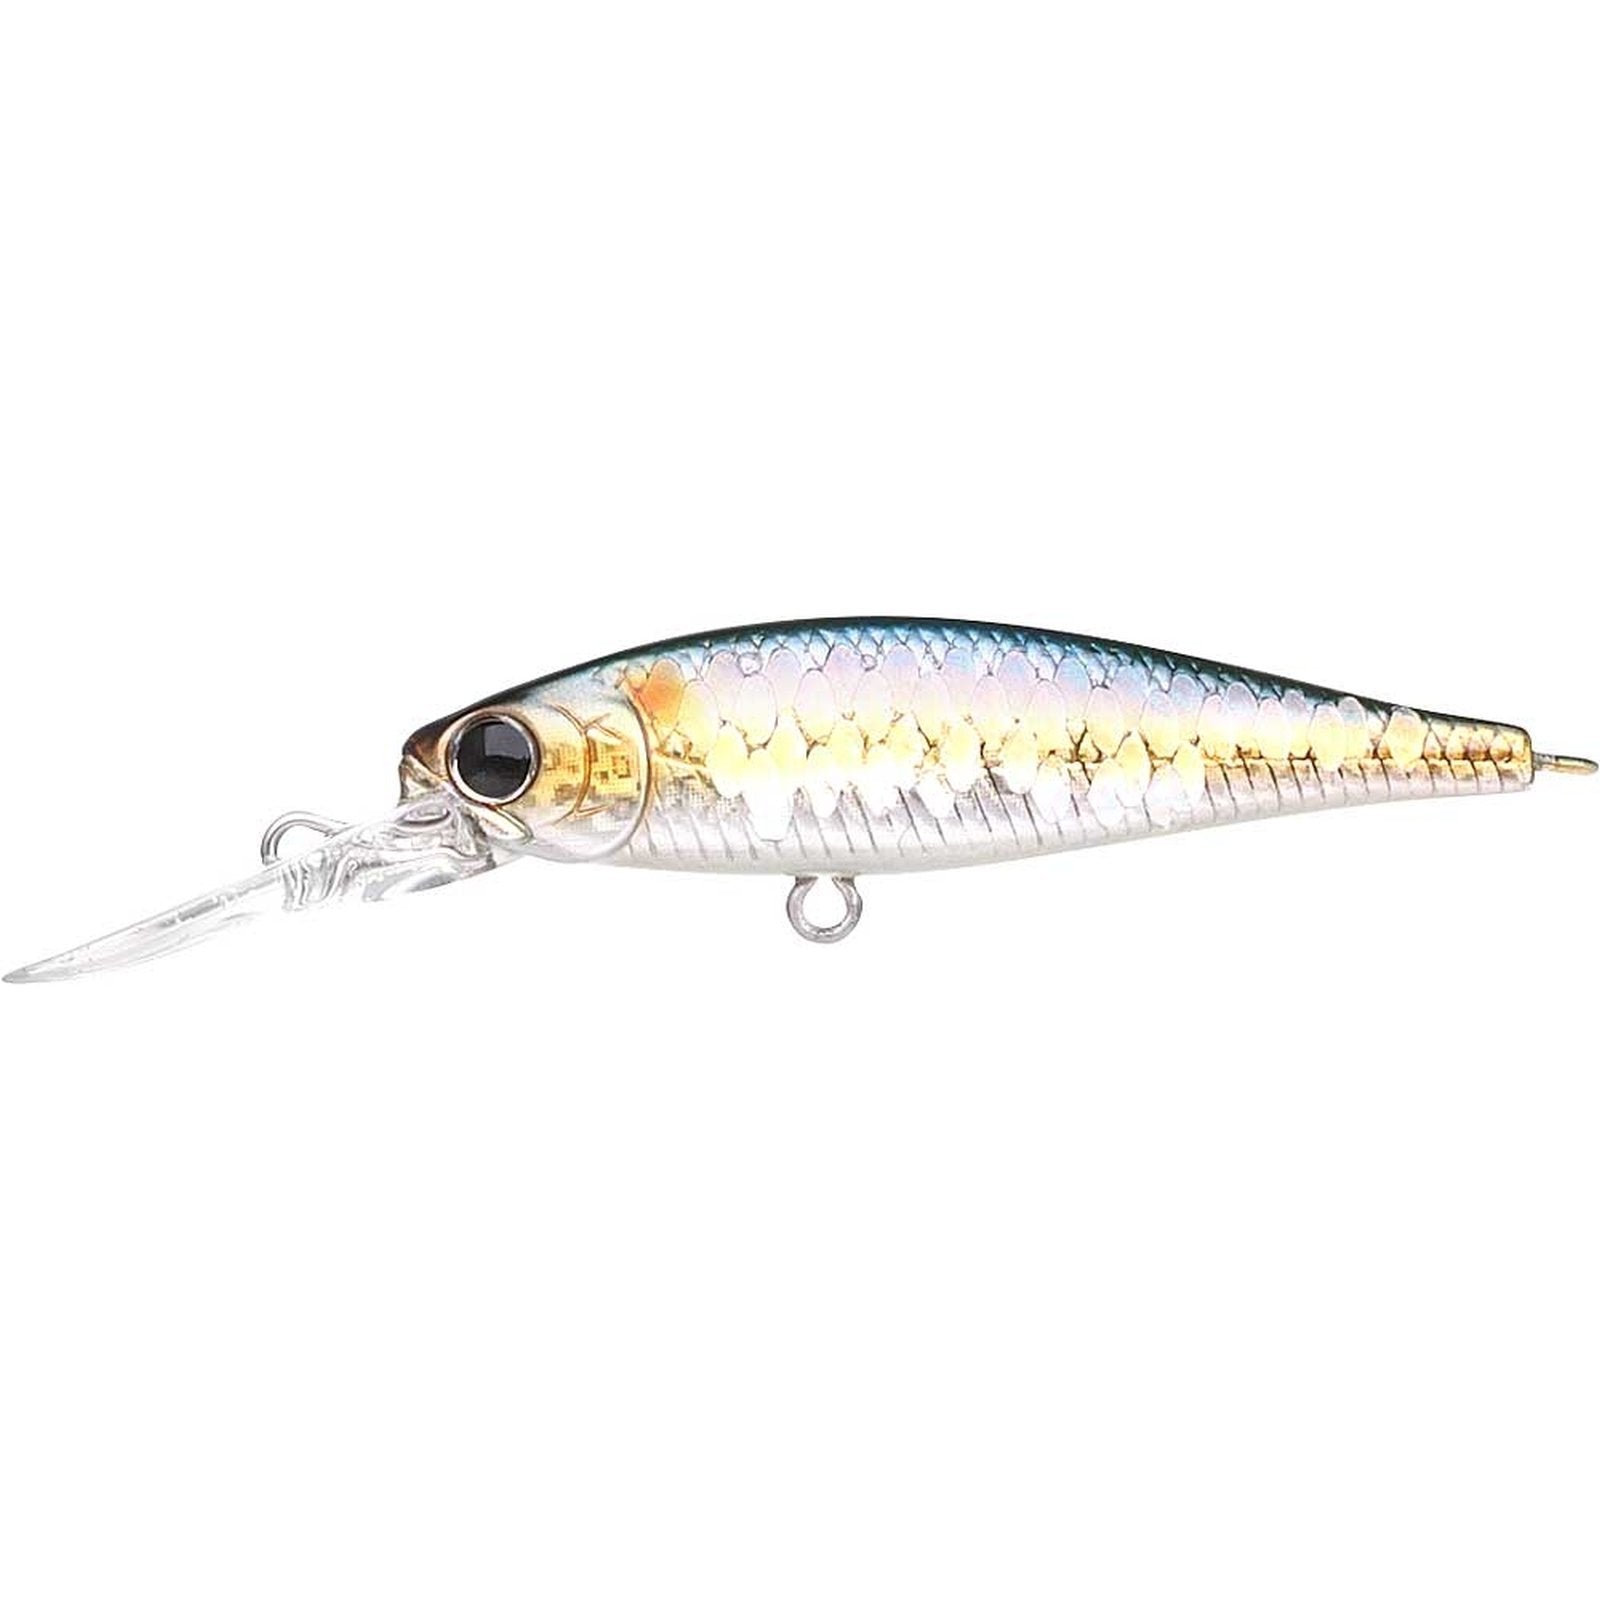 Lucky Craft Pointer 48 DDSP 270 MS American Shad